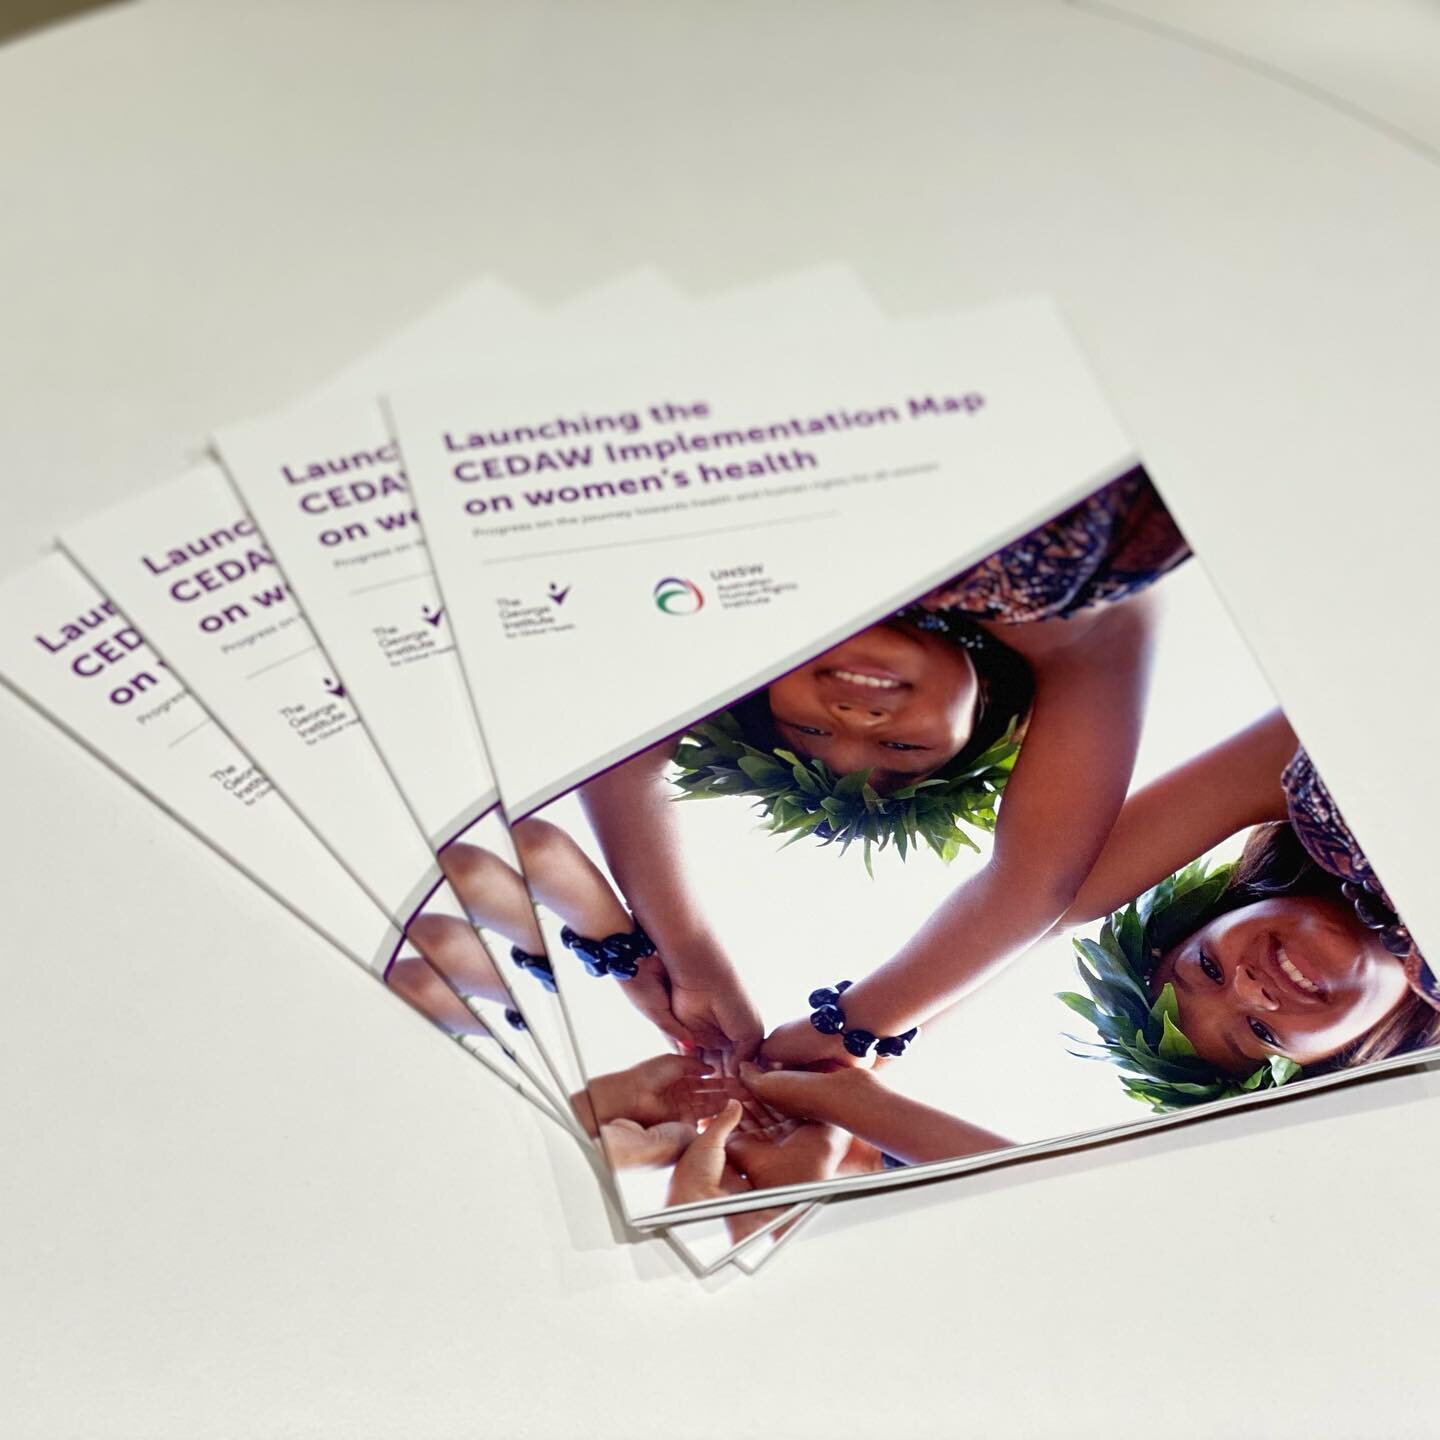 Exciting CEDAW Implementation Map launch report drops today for The George and The Australian Human Rights Institute. #ttc #talltreecreative #graphicdesign #reportdesign